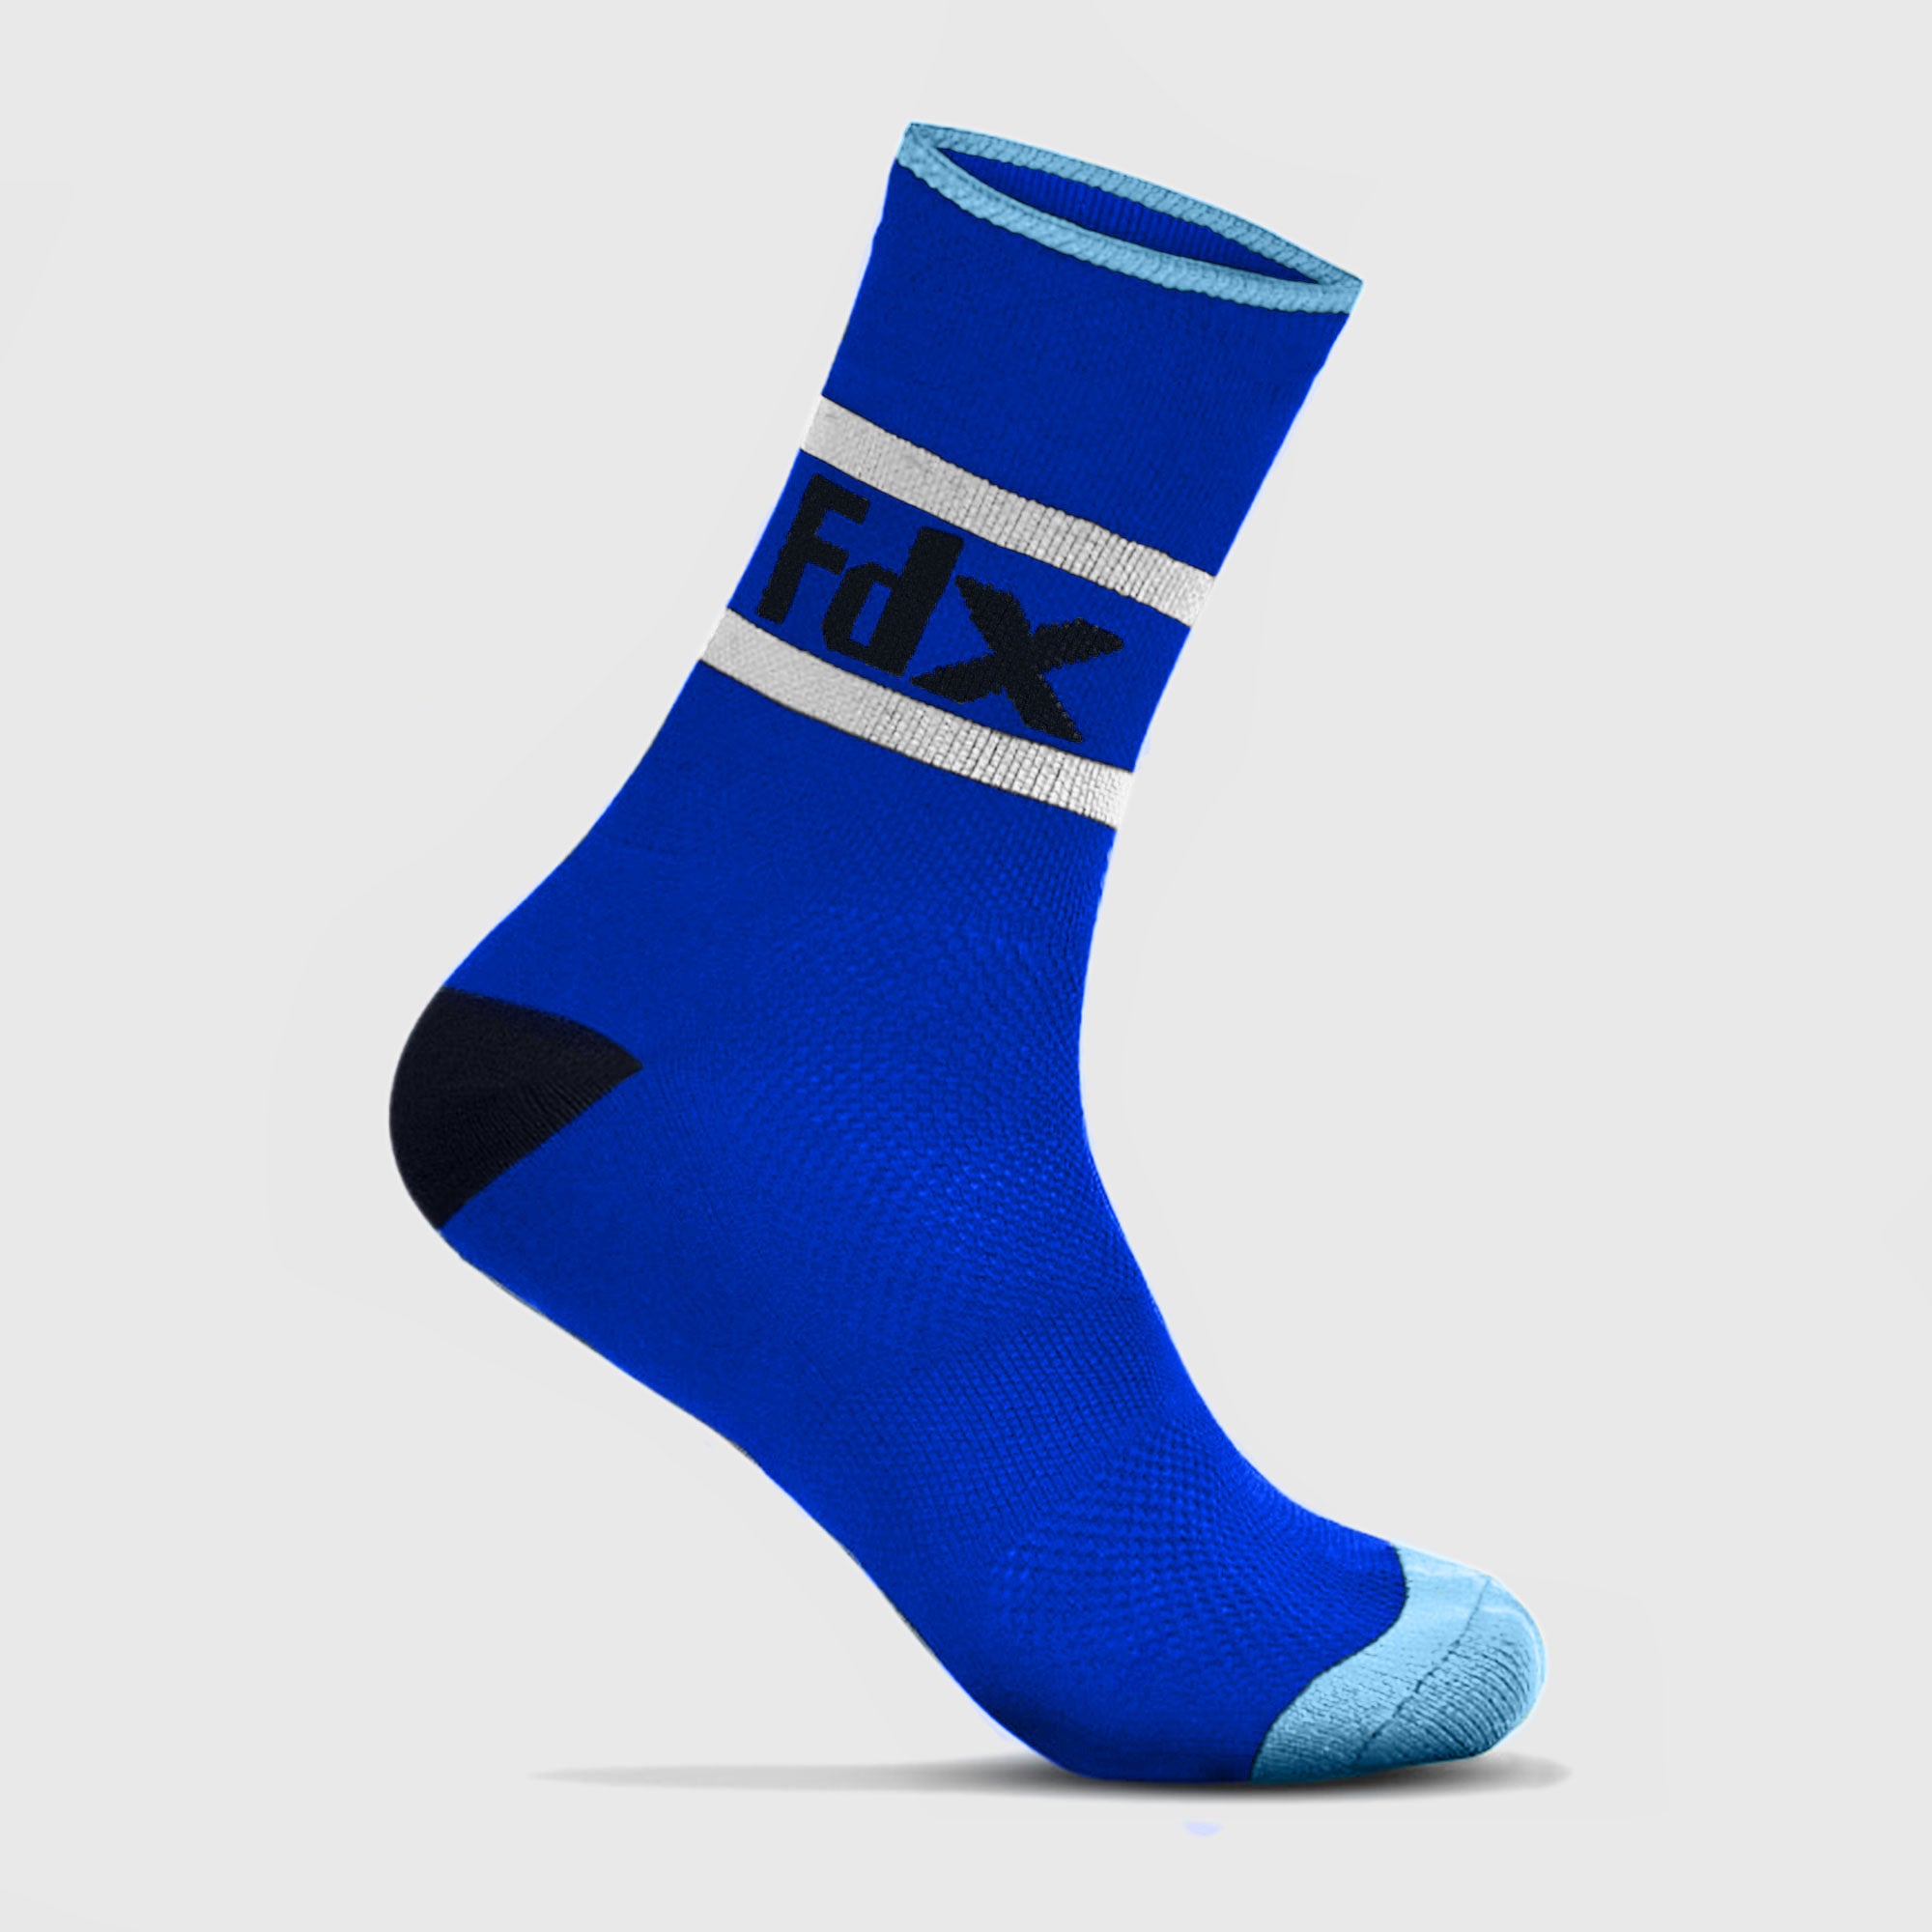 Fdx Blue Compression Socks for Cycling & Running